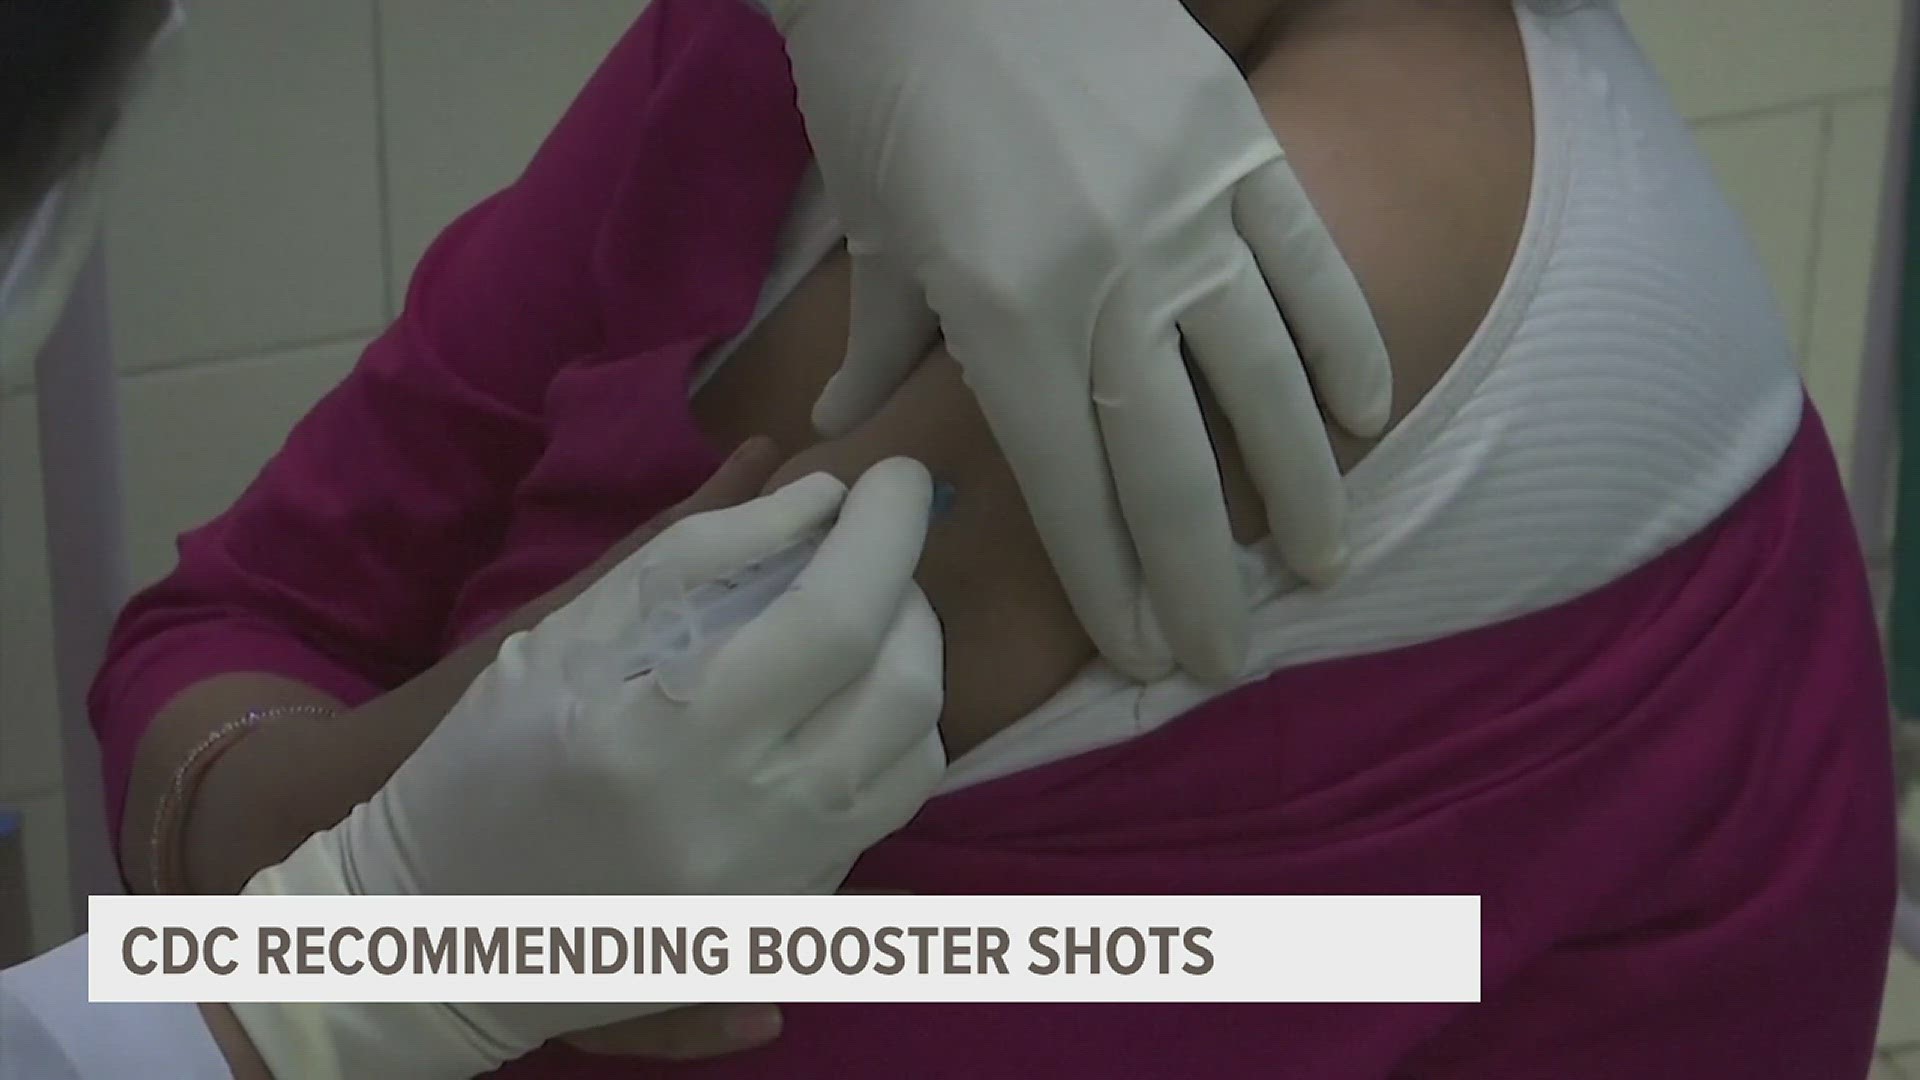 For Americans six months old and older, the CDC is recommending getting updated COVID boosters.